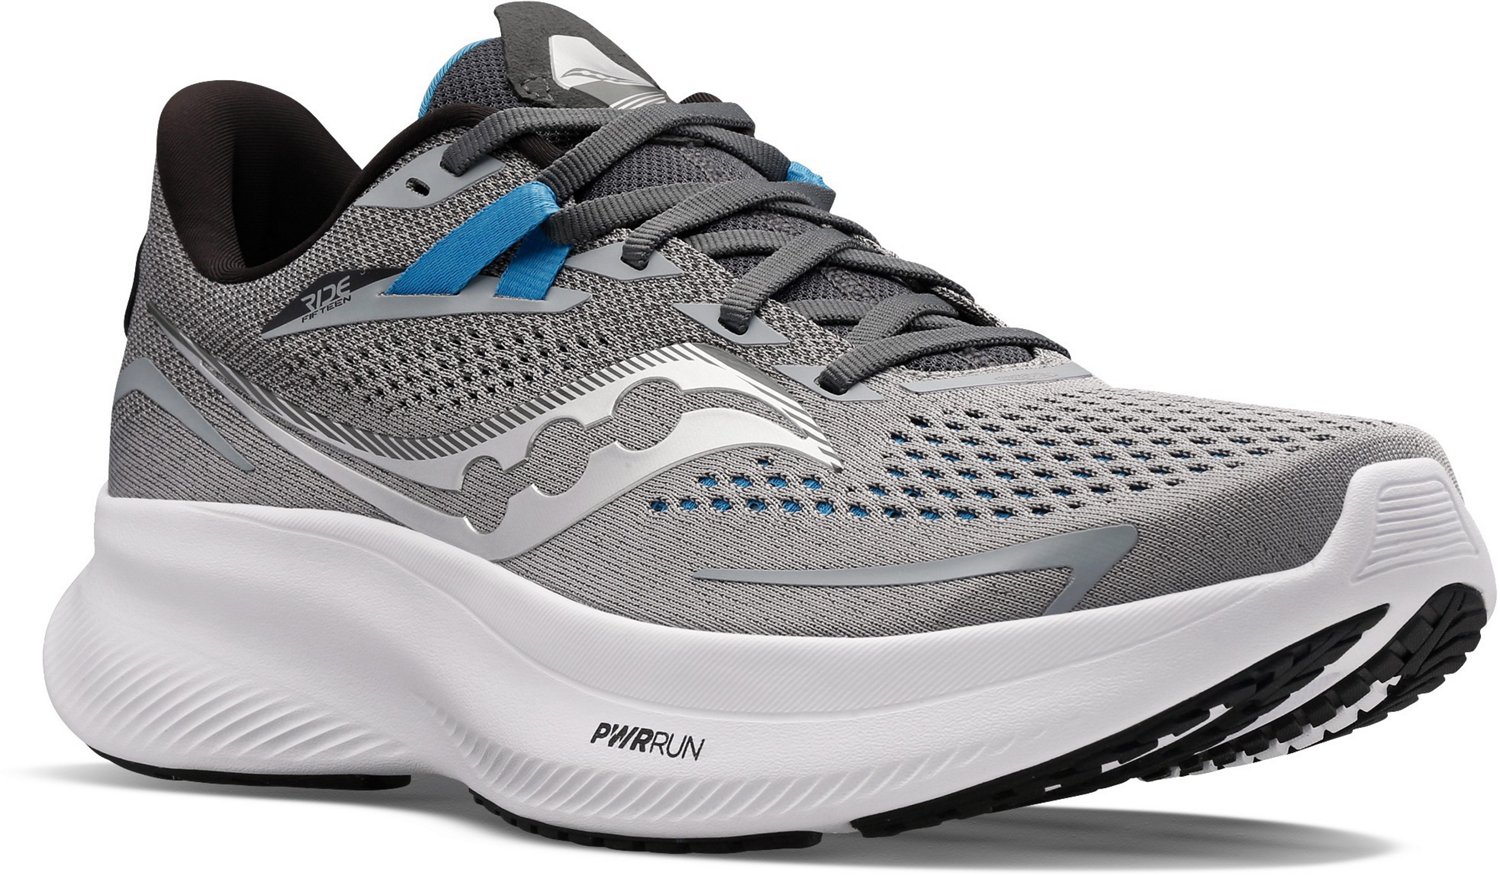 Saucony Men's Ride 15 Running Shoes | Free Shipping at Academy